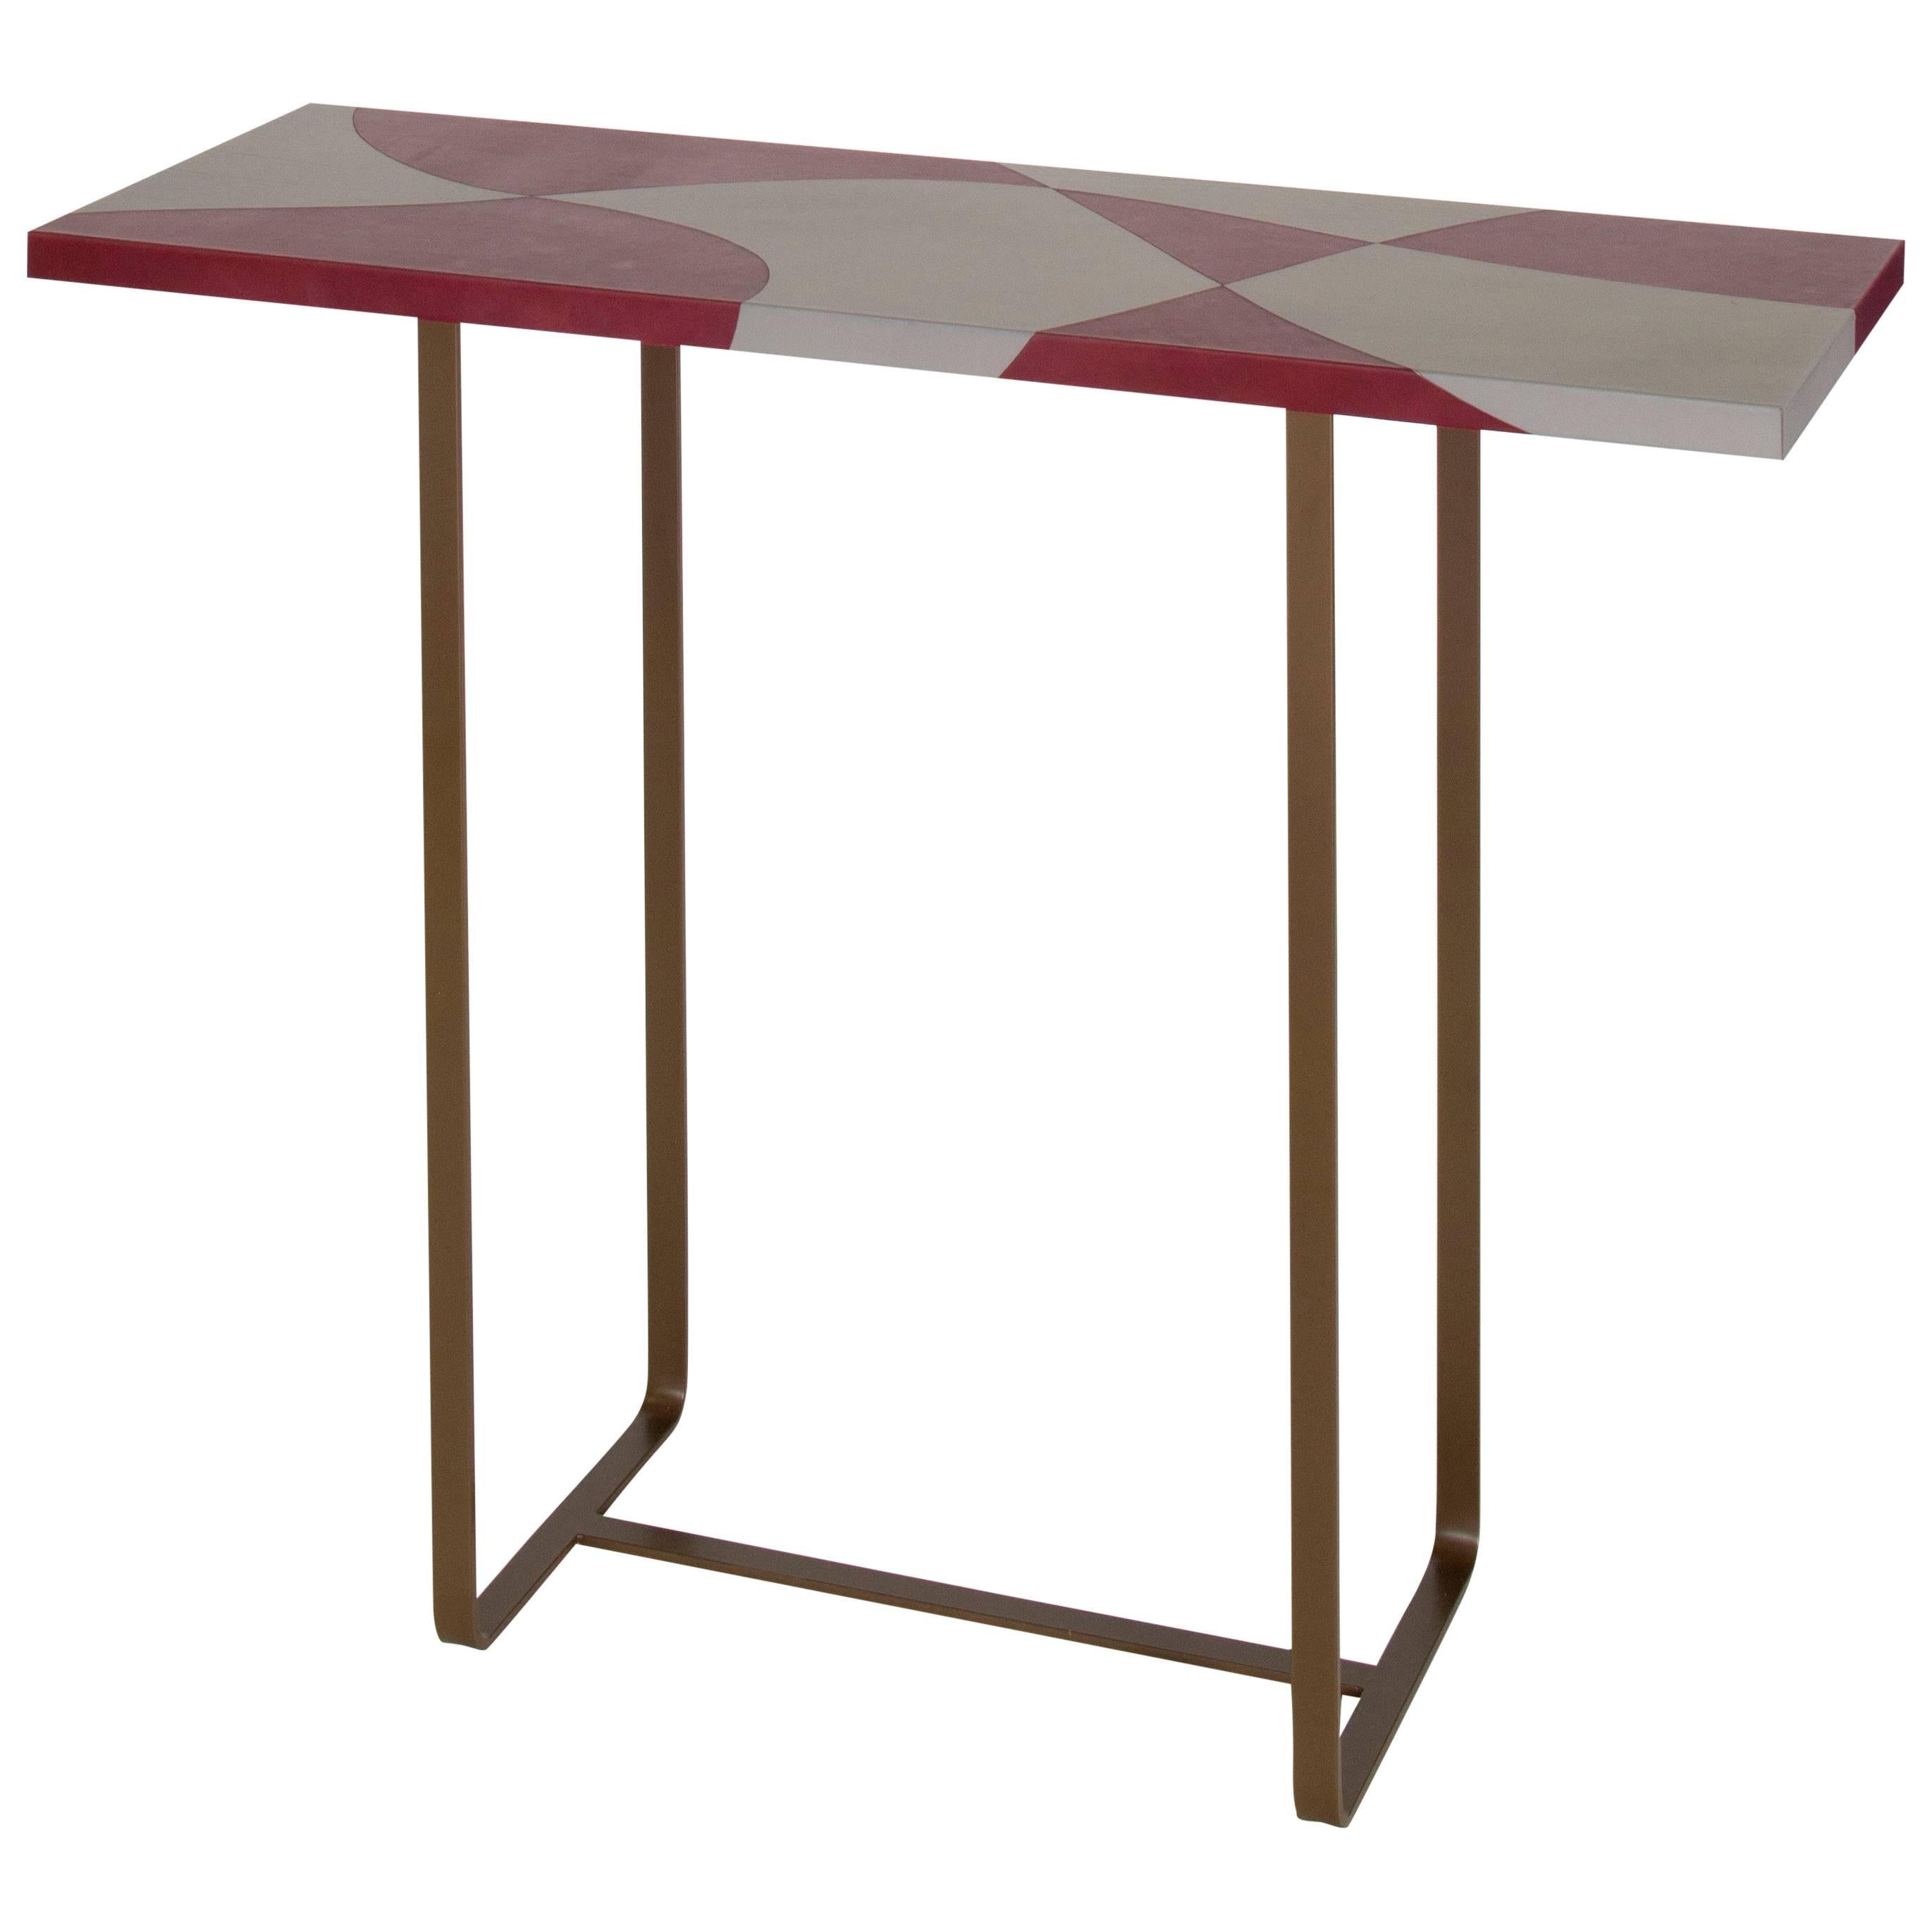 "Flores" Inlaid Leather Top Console Table by Nestor Perkal for Oscar Maschera